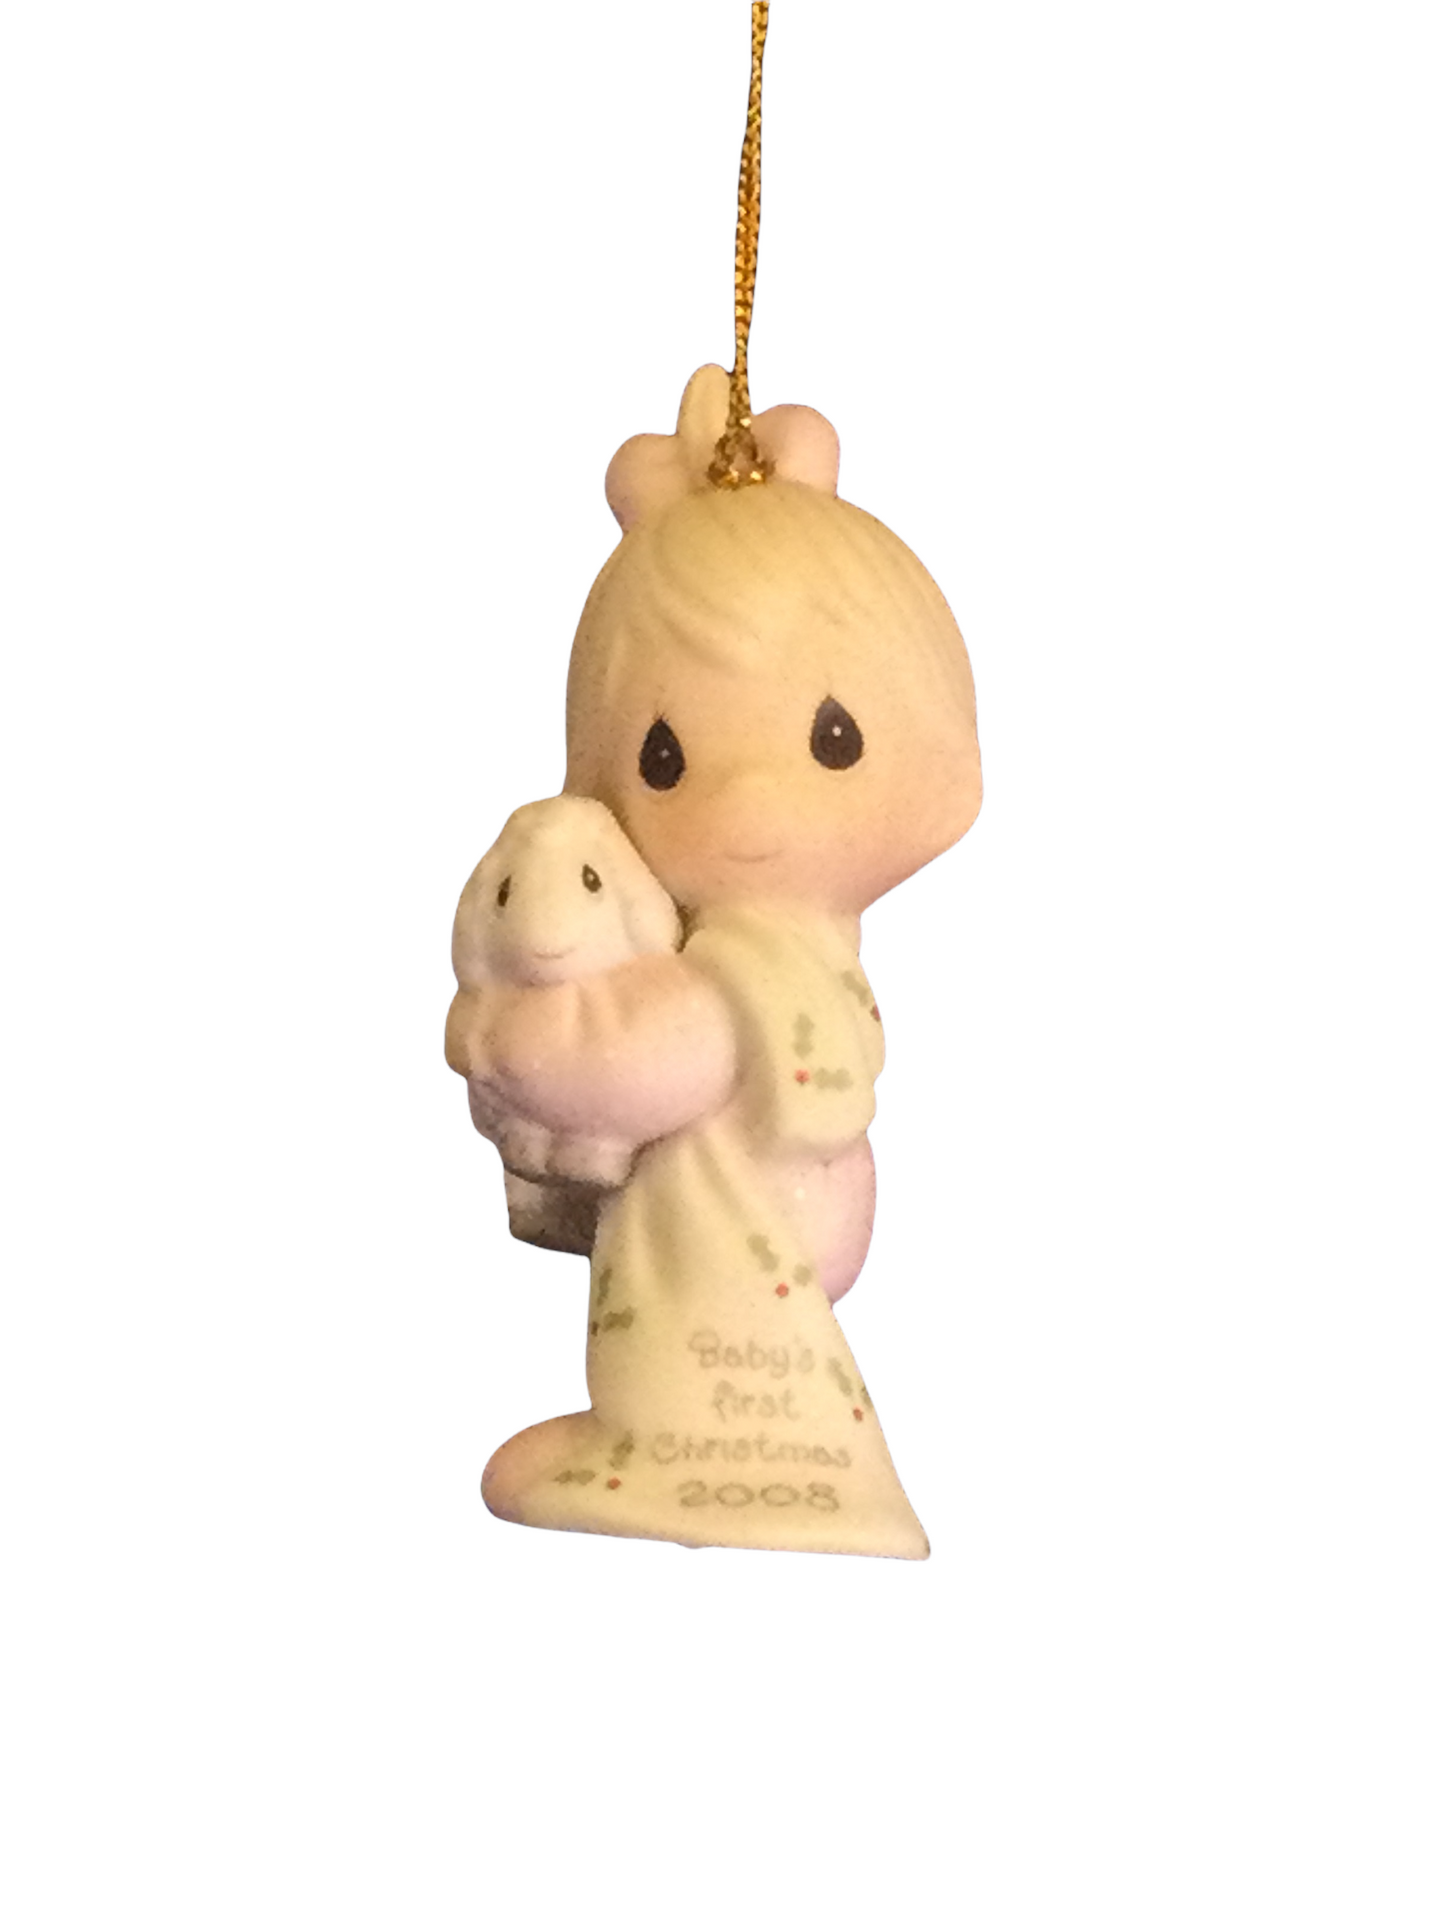 Baby's First Christmas 2008 (Girl) - Precious Moment Ornament